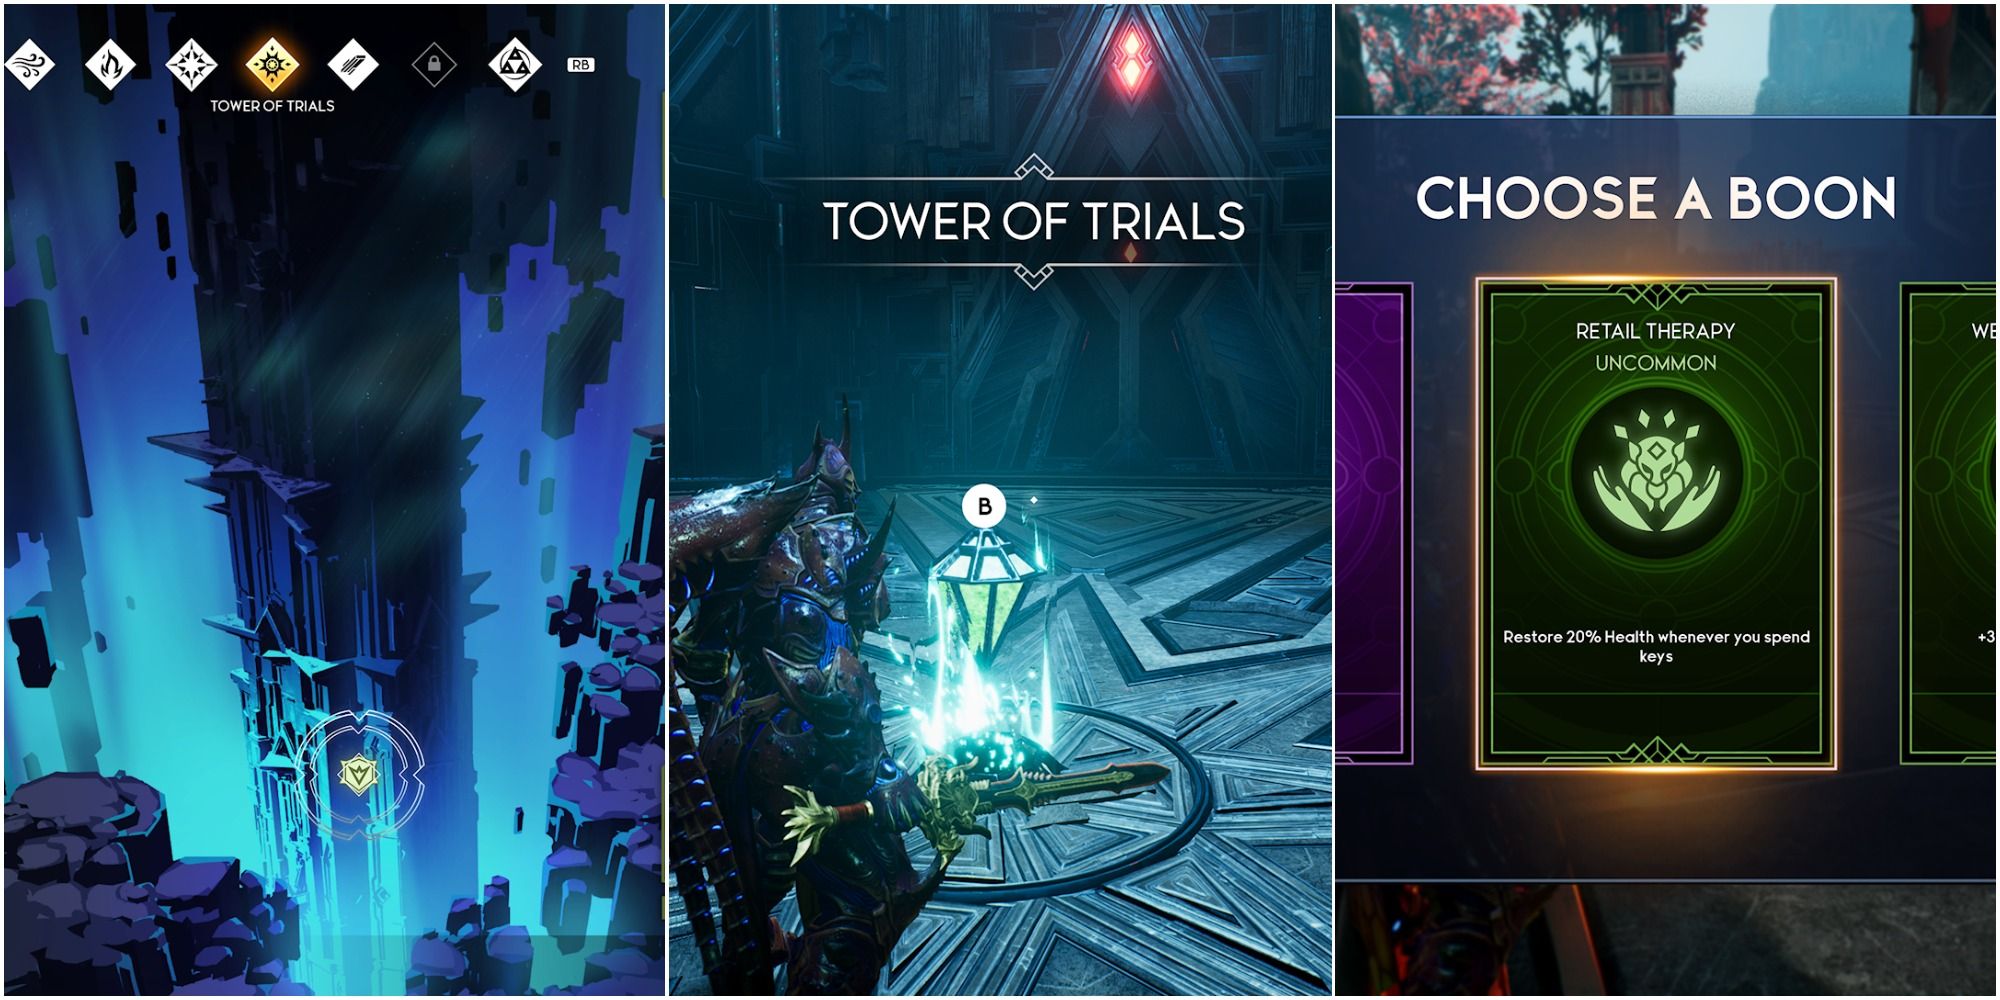 Godfall collage of tower of trials map, tower of trials main chamber, and tower of trials boon reward